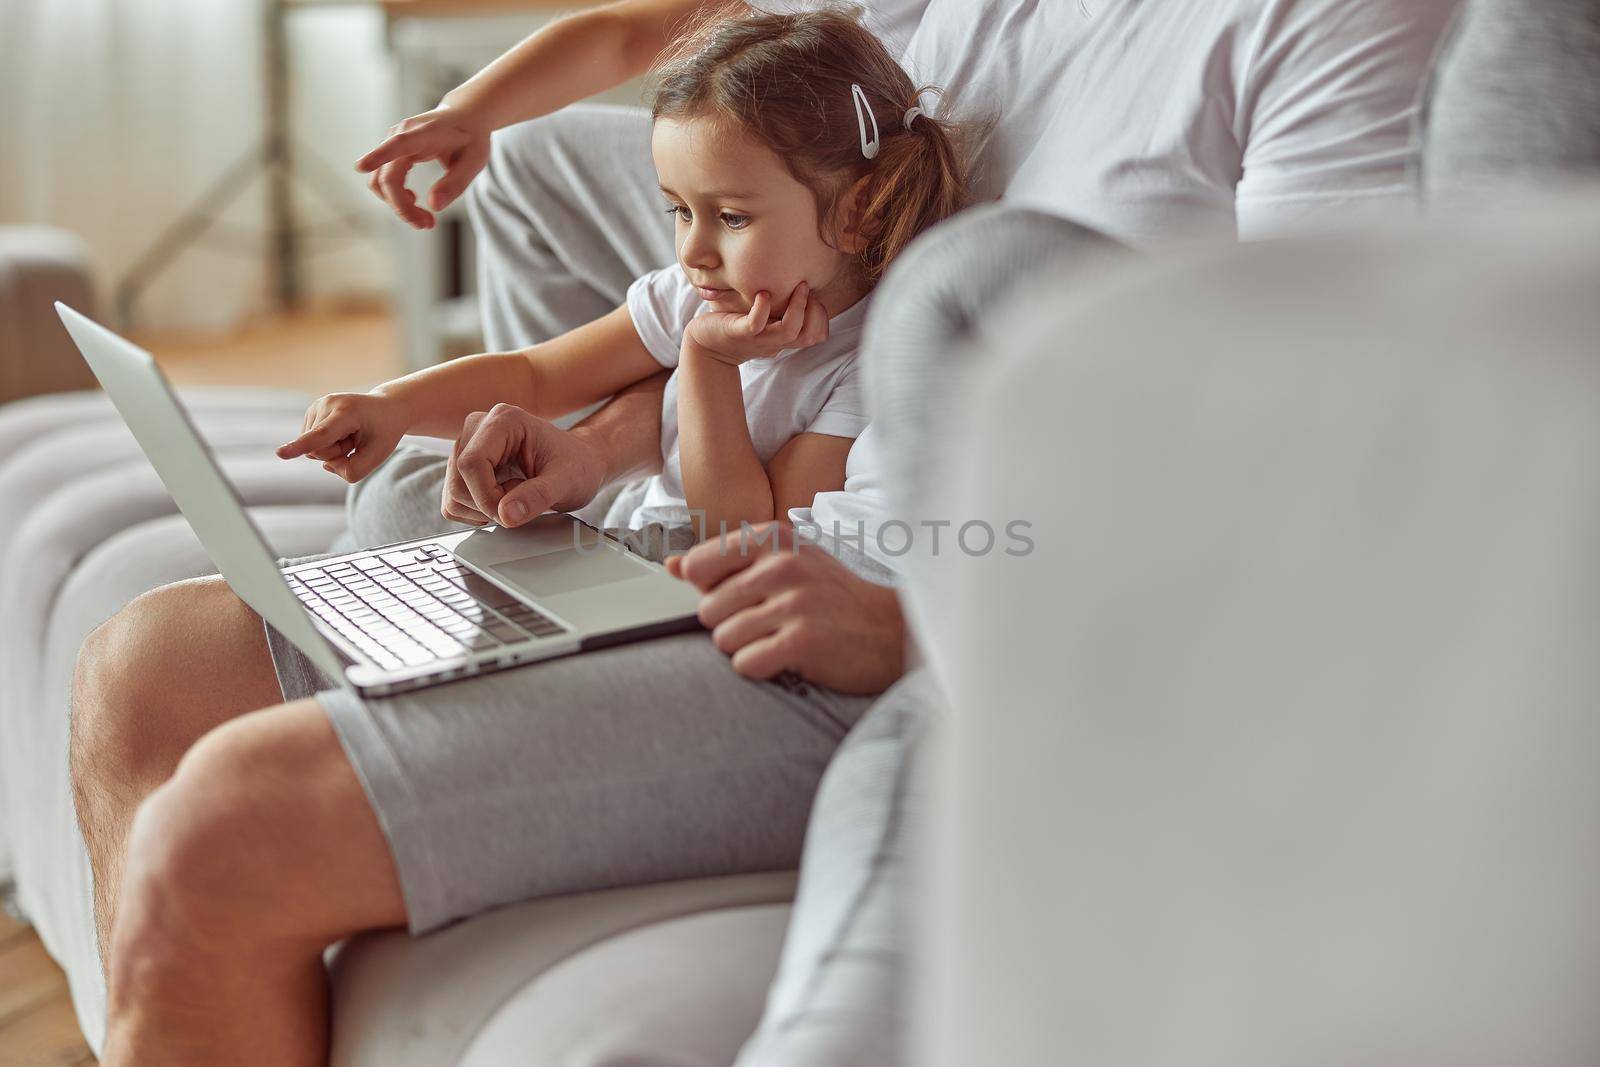 Curious girl watching video with family on laptop by Yaroslav_astakhov